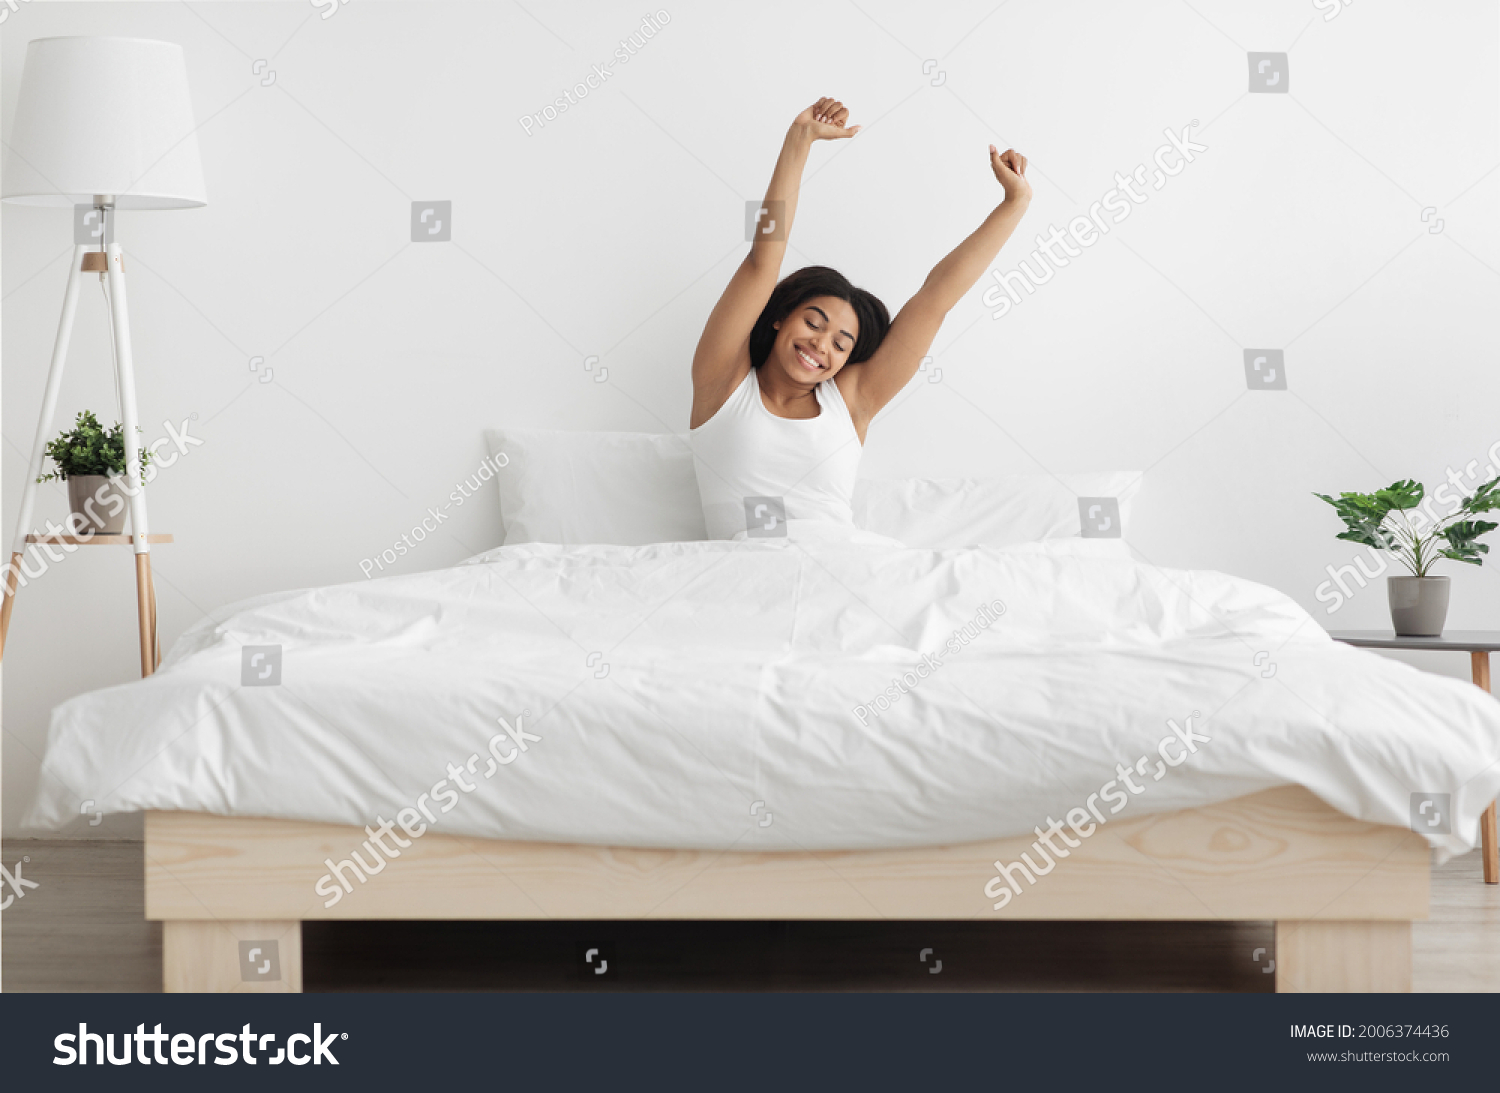 Good start of new day. Well-slept african american lady stretching arms after waking up, feeling happy and full of vitality. Young woman sitting in comfortable bed in coy bedroom interior #2006374436